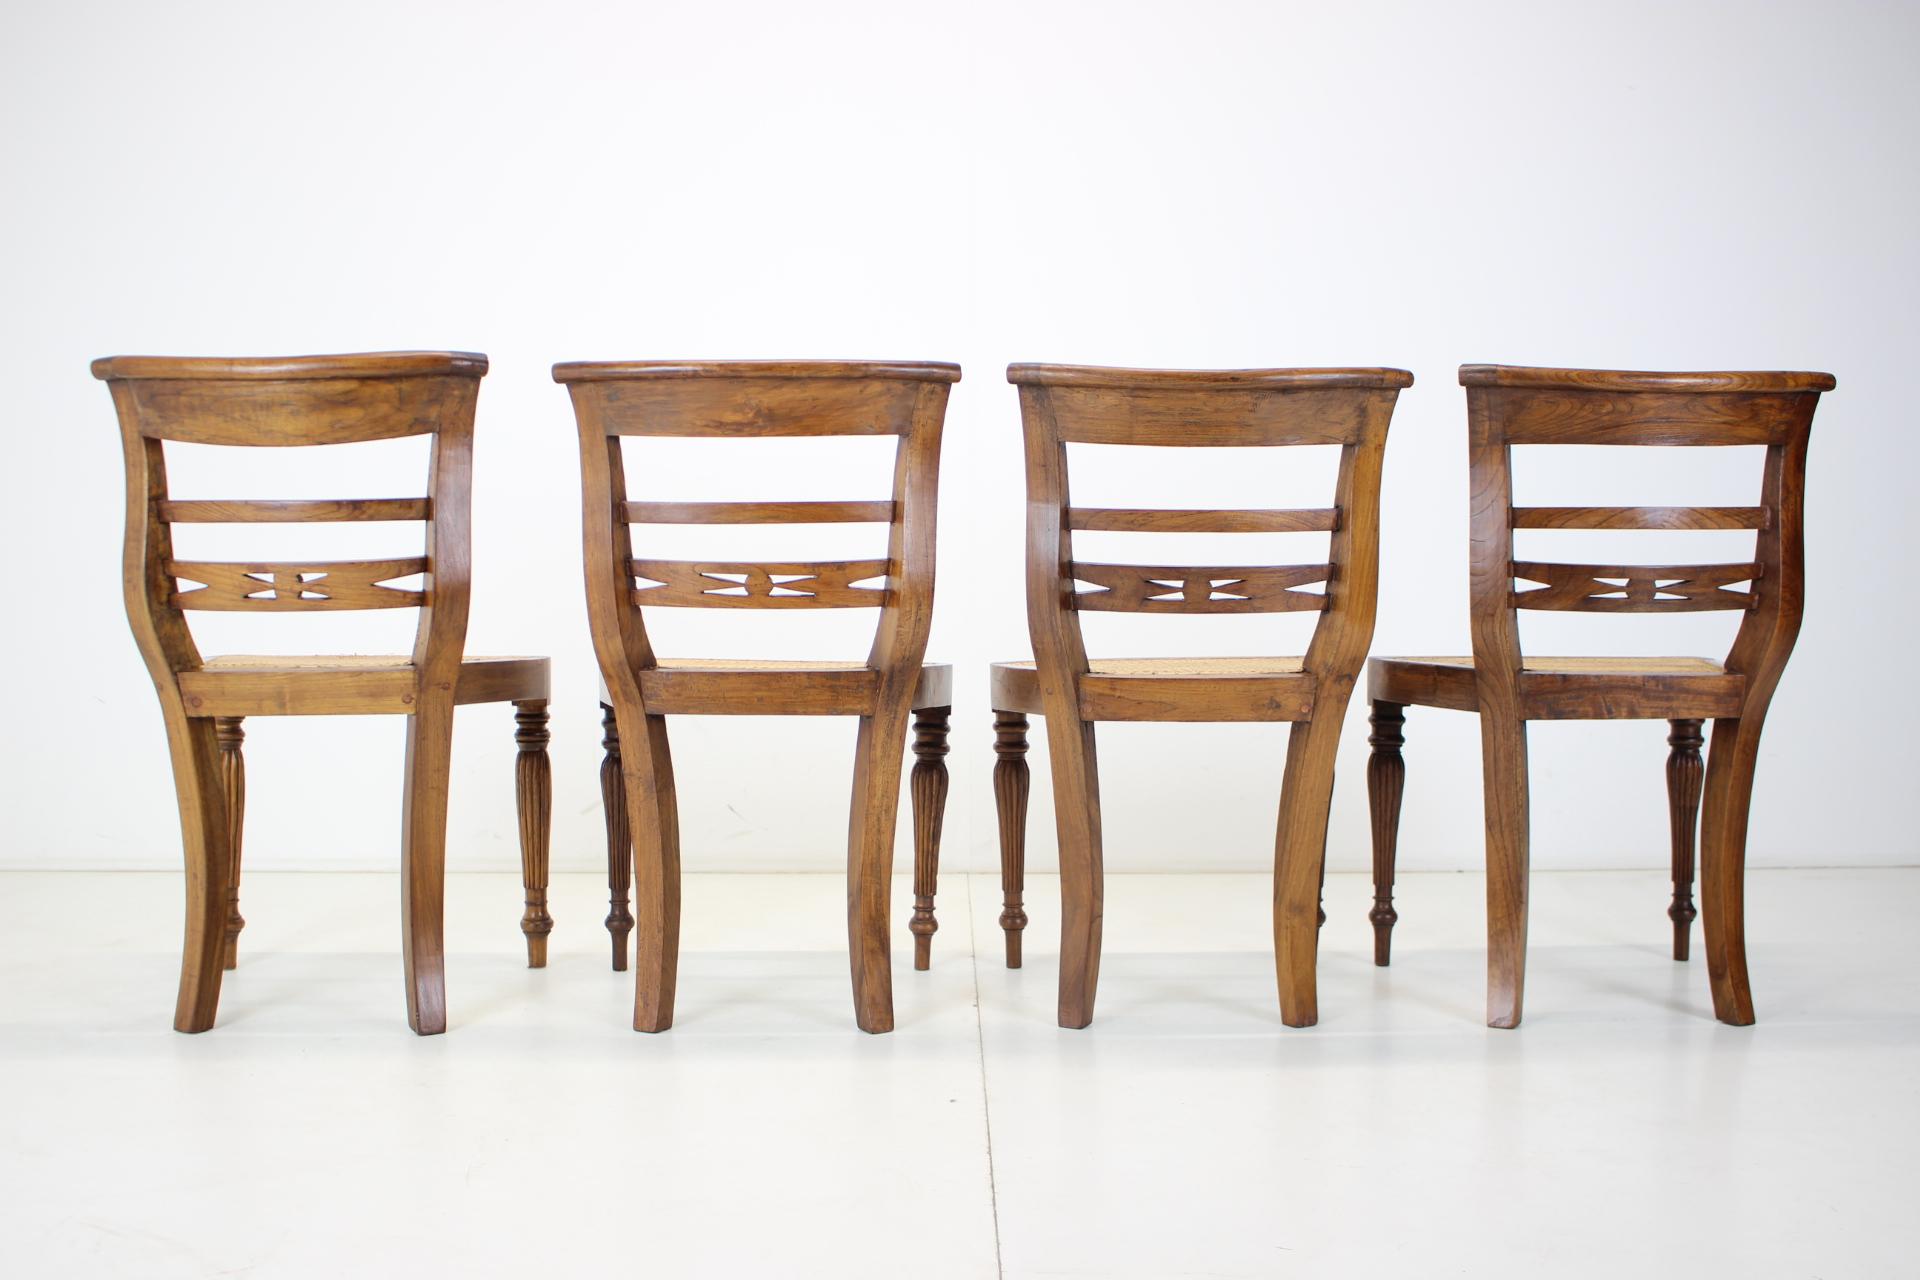 Set of Four Dining Chairs, Made of Solid Wood, 1950s, Czechoslovakia For Sale 2